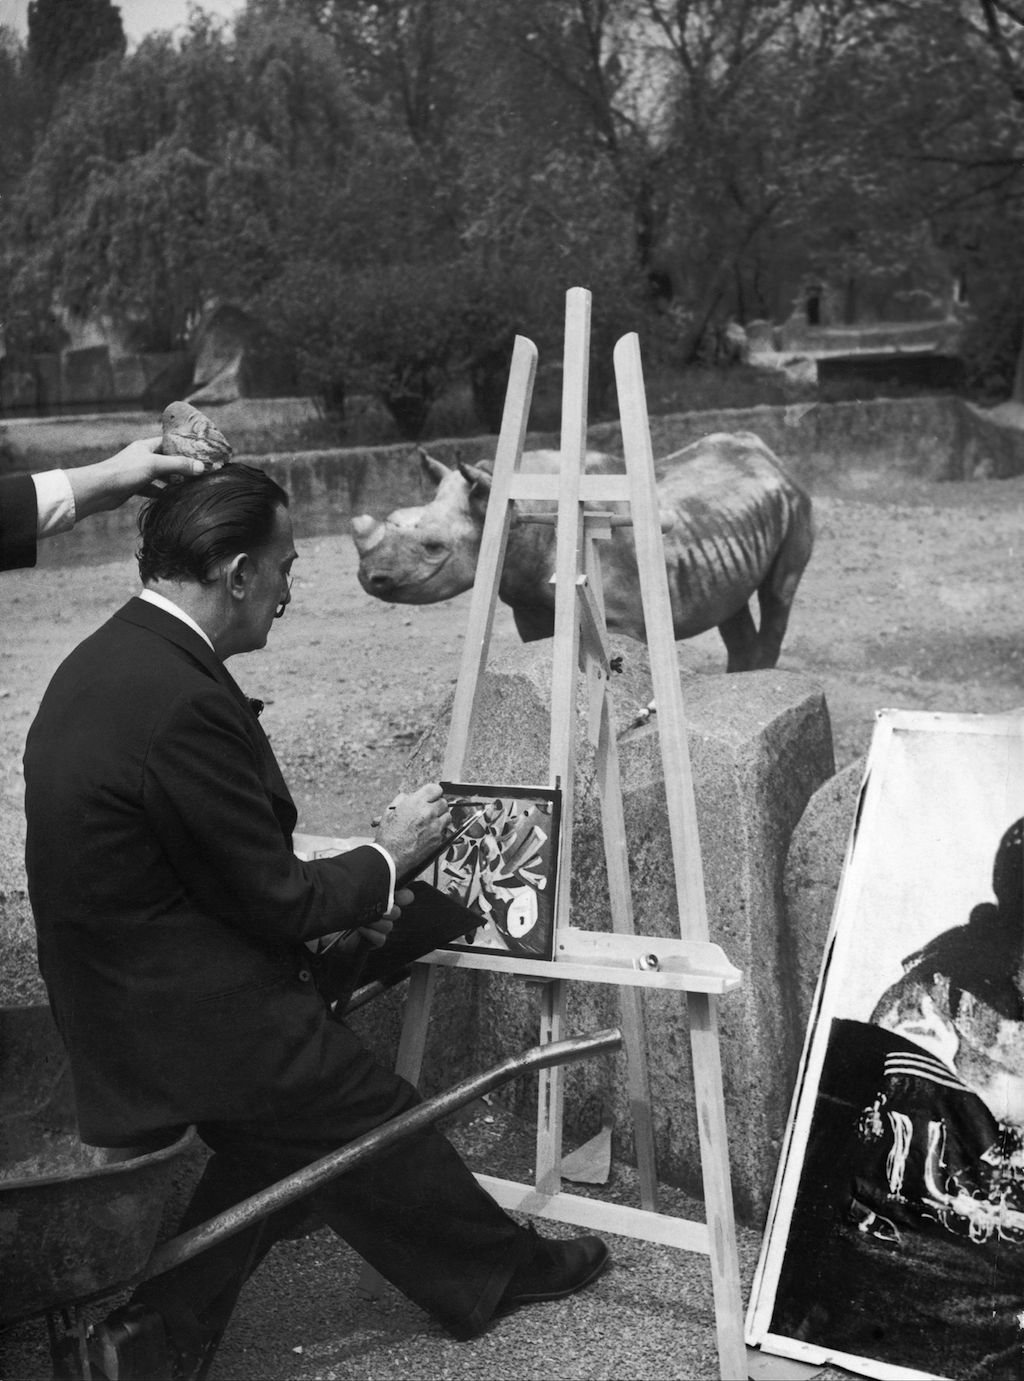 Salvador Dali Painting At The Vincennes Zoo In 1955